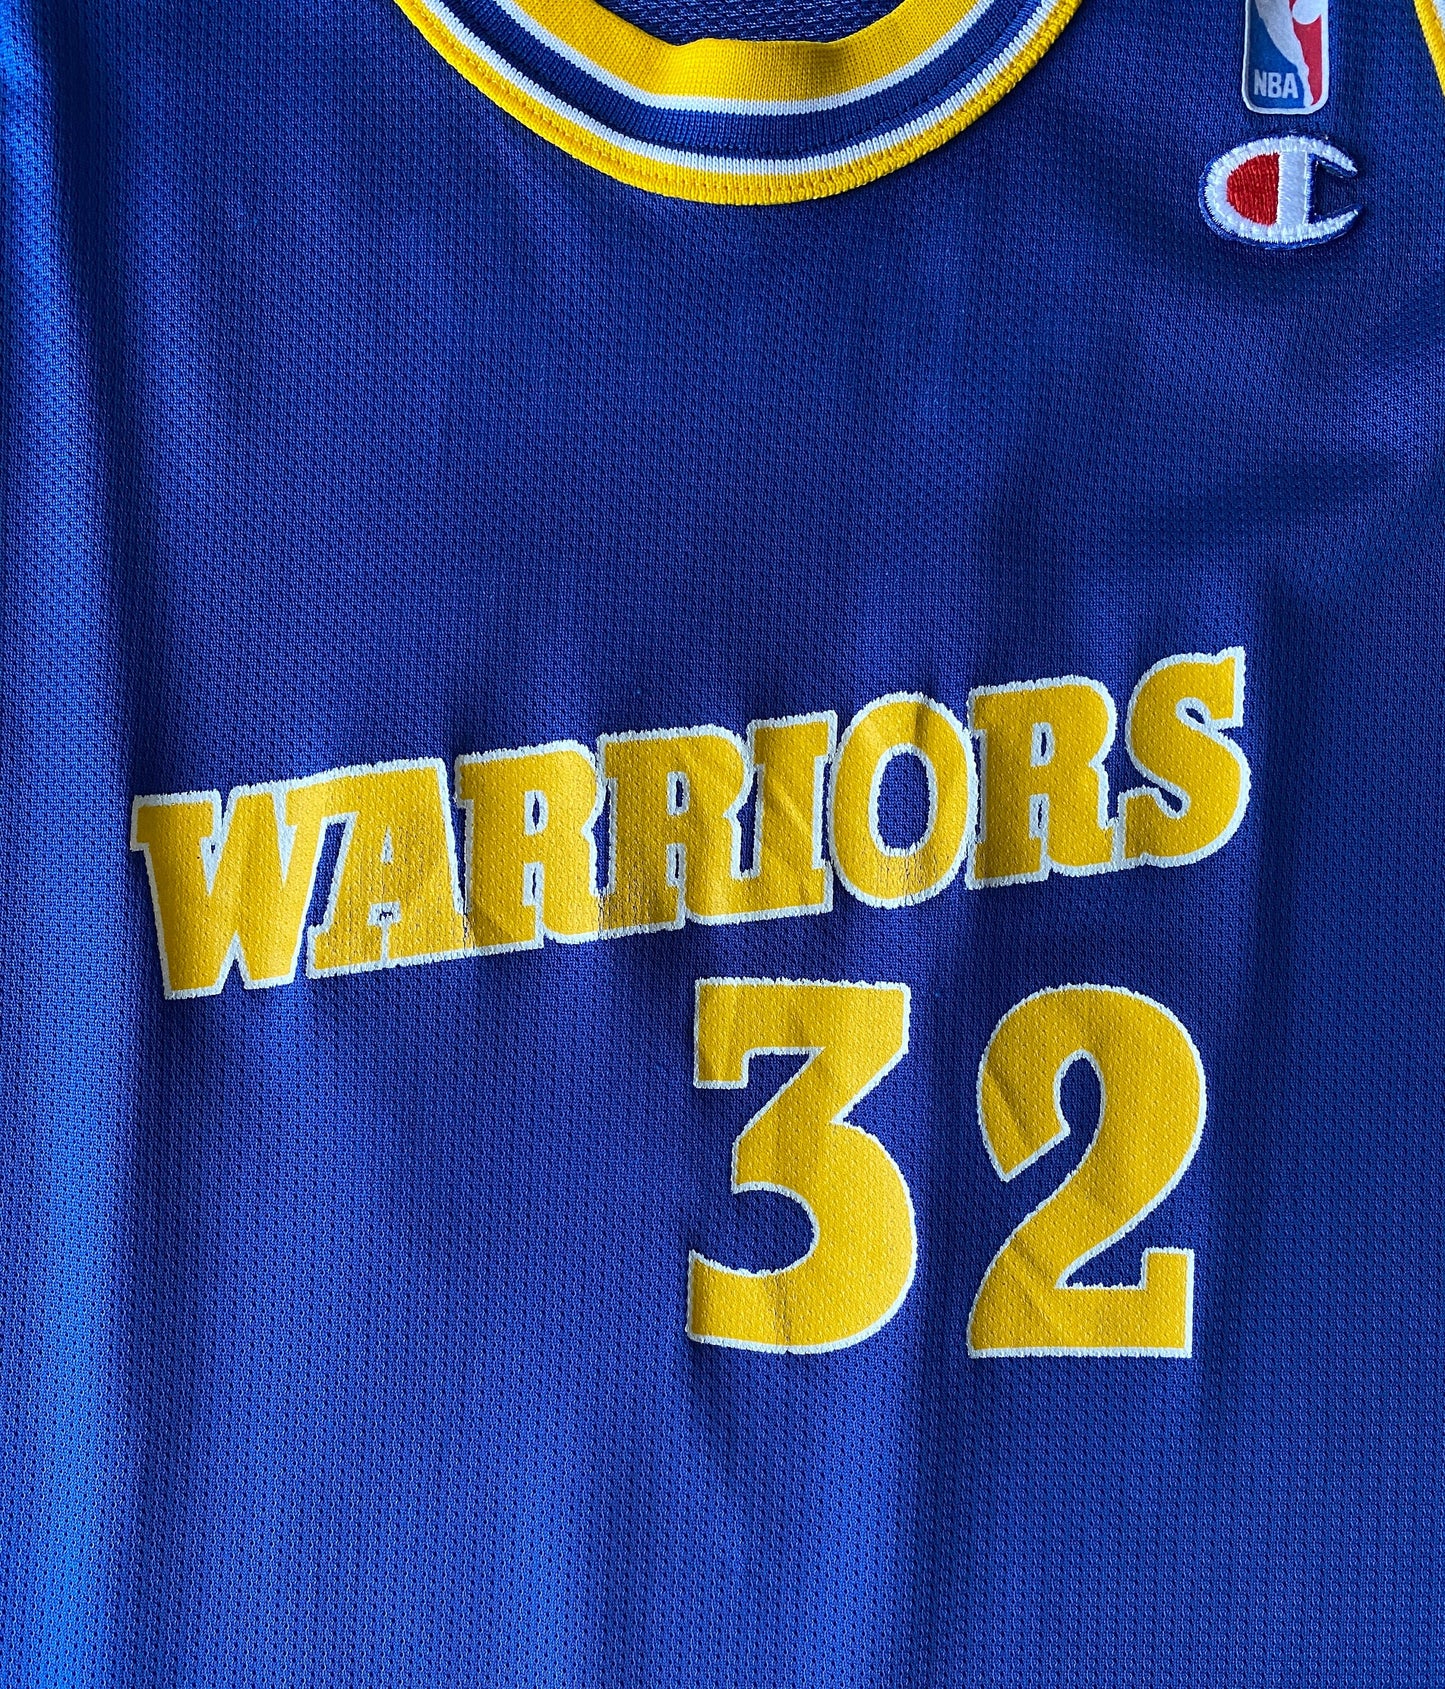 Youth 18-20. Vintage 90s Champion NBA Warriors #32 Smith jersey  Made In USA